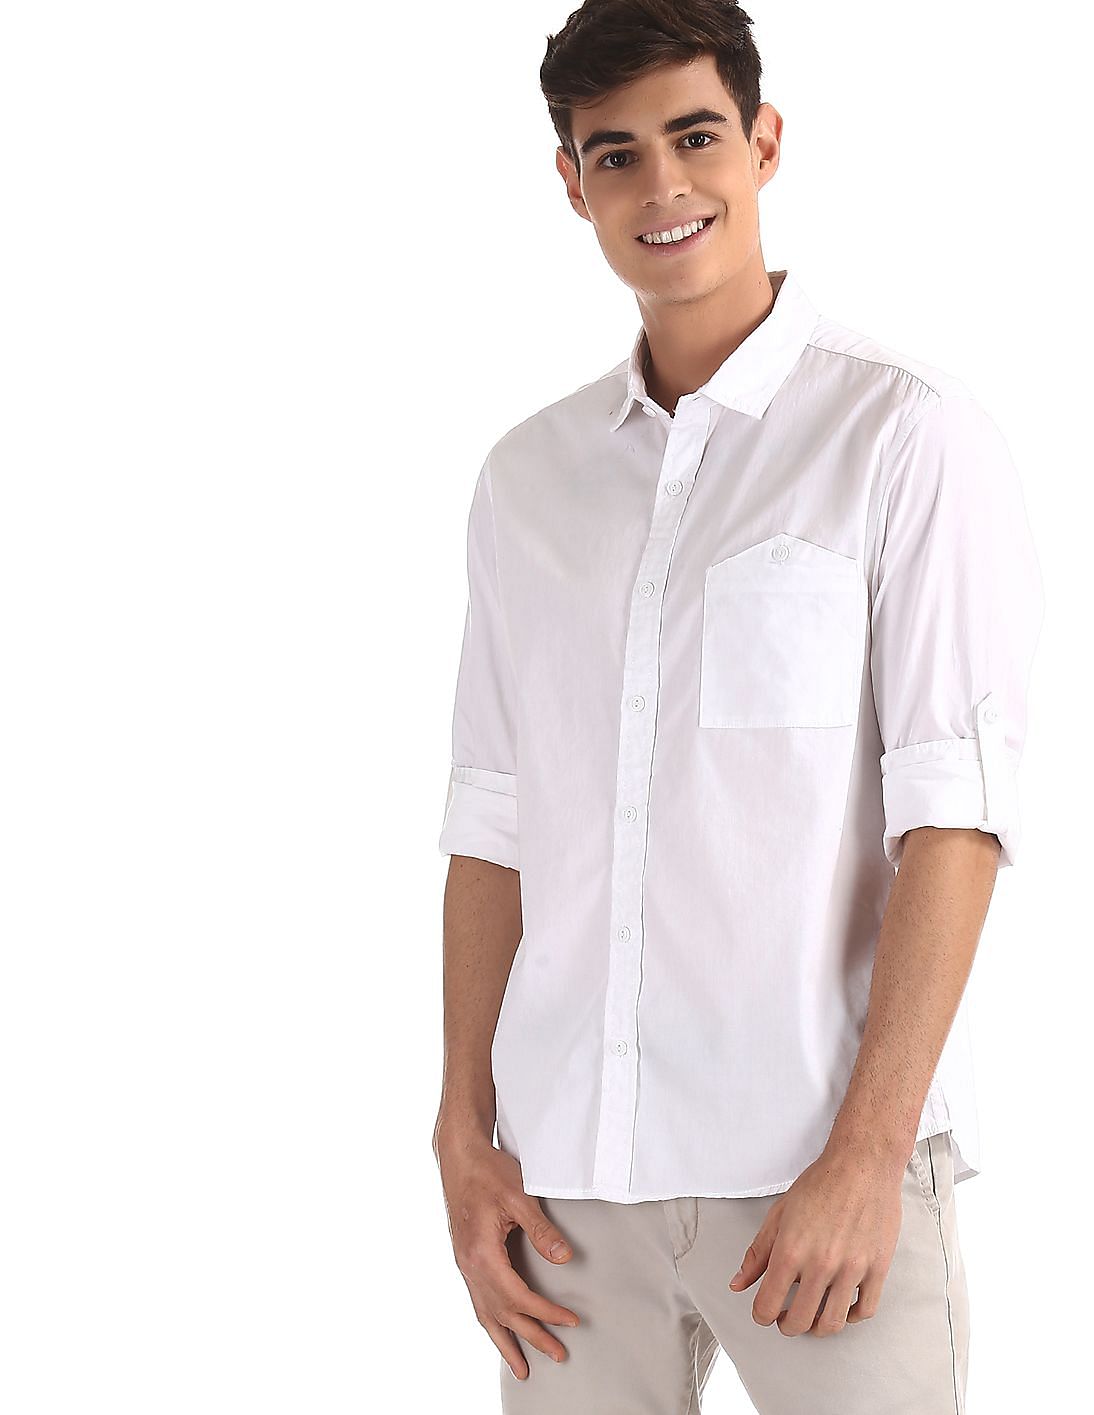 Buy Colt White Roll Up Sleeve Solid Shirt - NNNOW.com